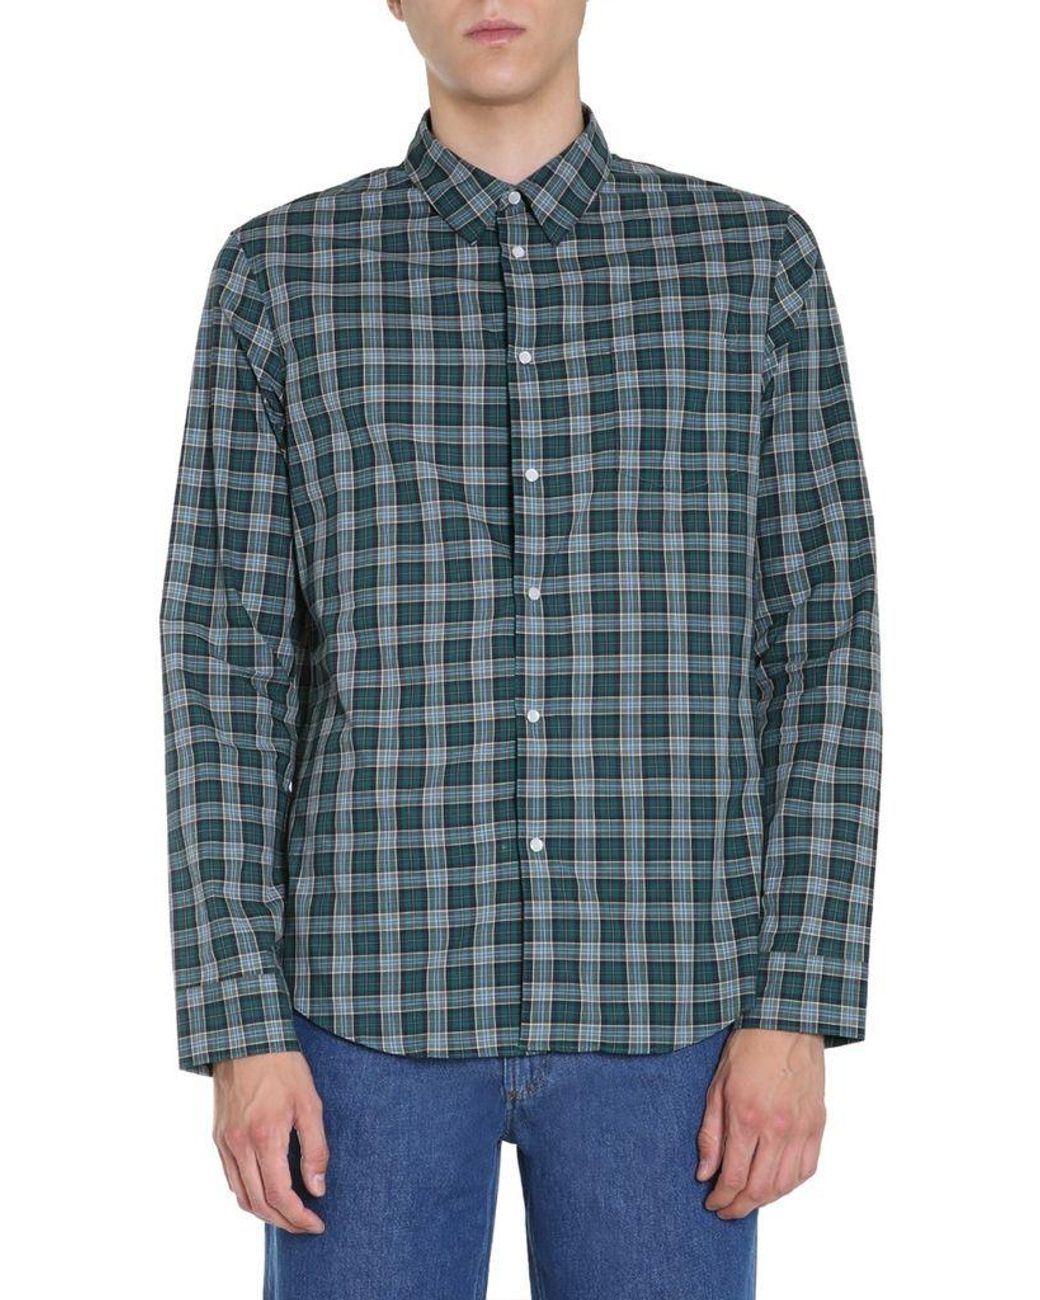 KENZO Cotton Slim Fit Shirt in Green for Men - Lyst